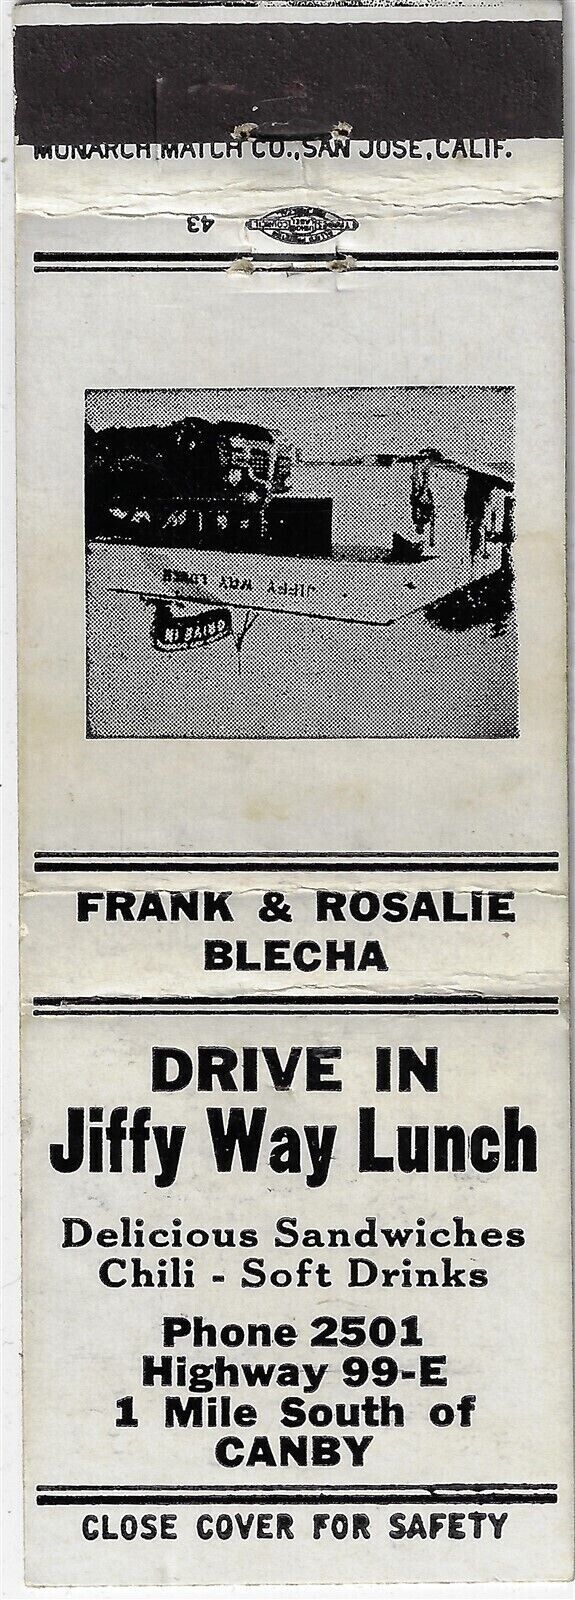 Drive In Jiffy Way Lunch Frank & Rosalie Belcha South of Canby Empty Matchcover